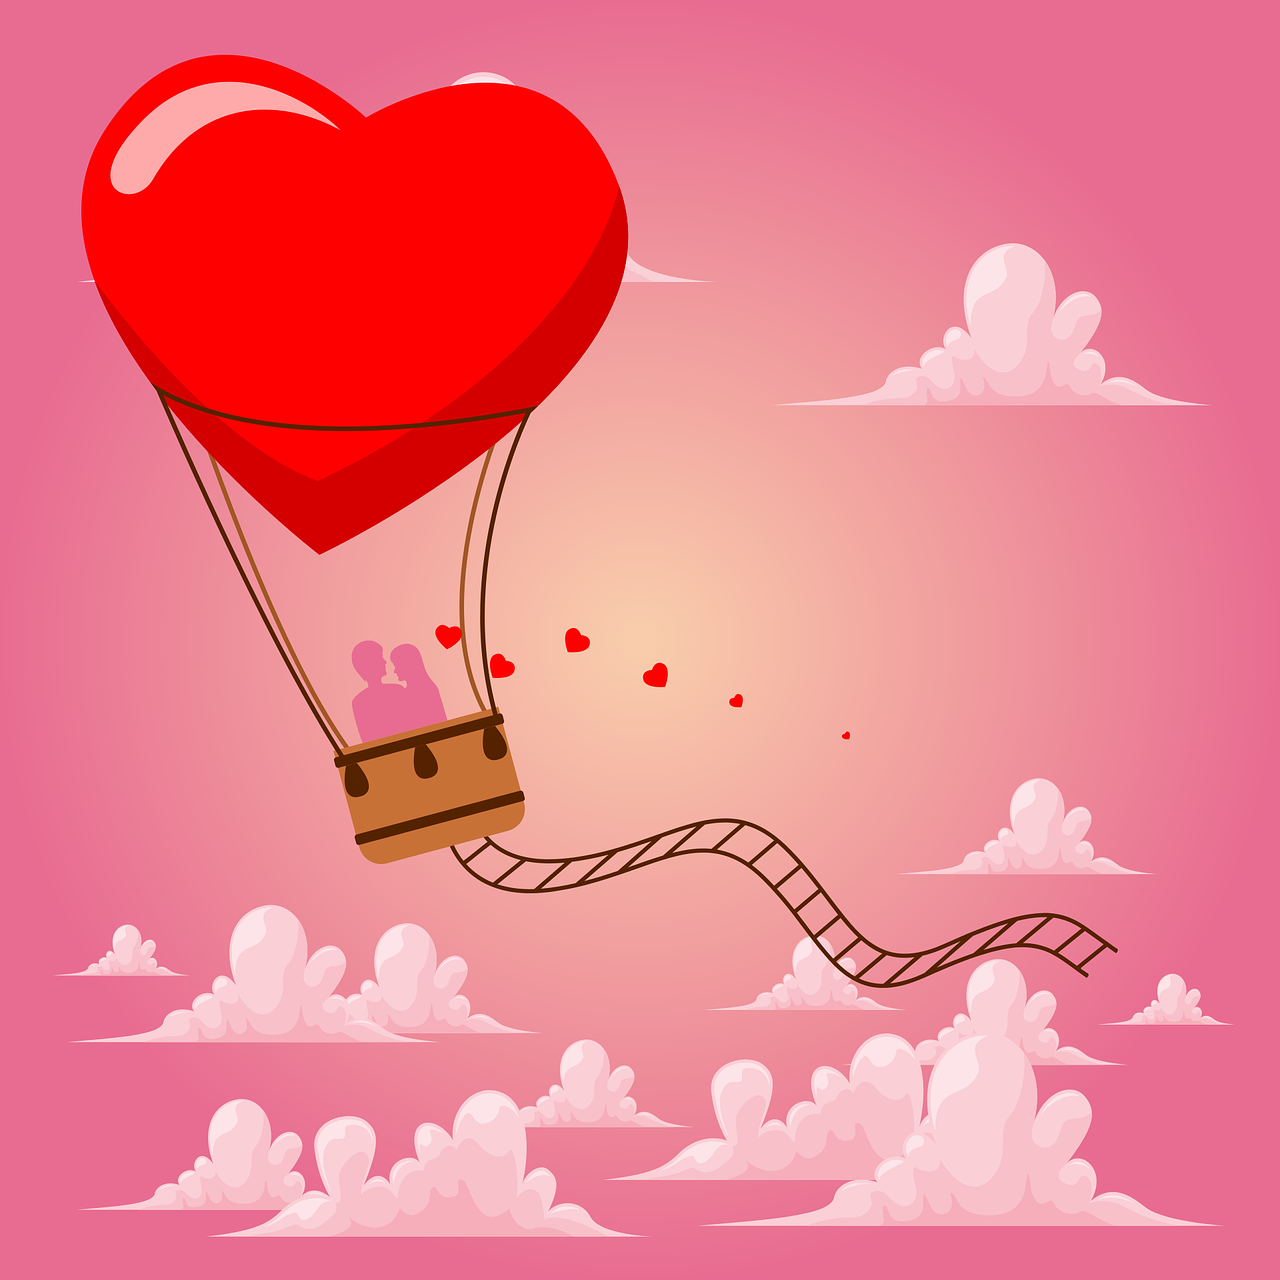 Couple riding in a hot air balloon shaped like a heart.